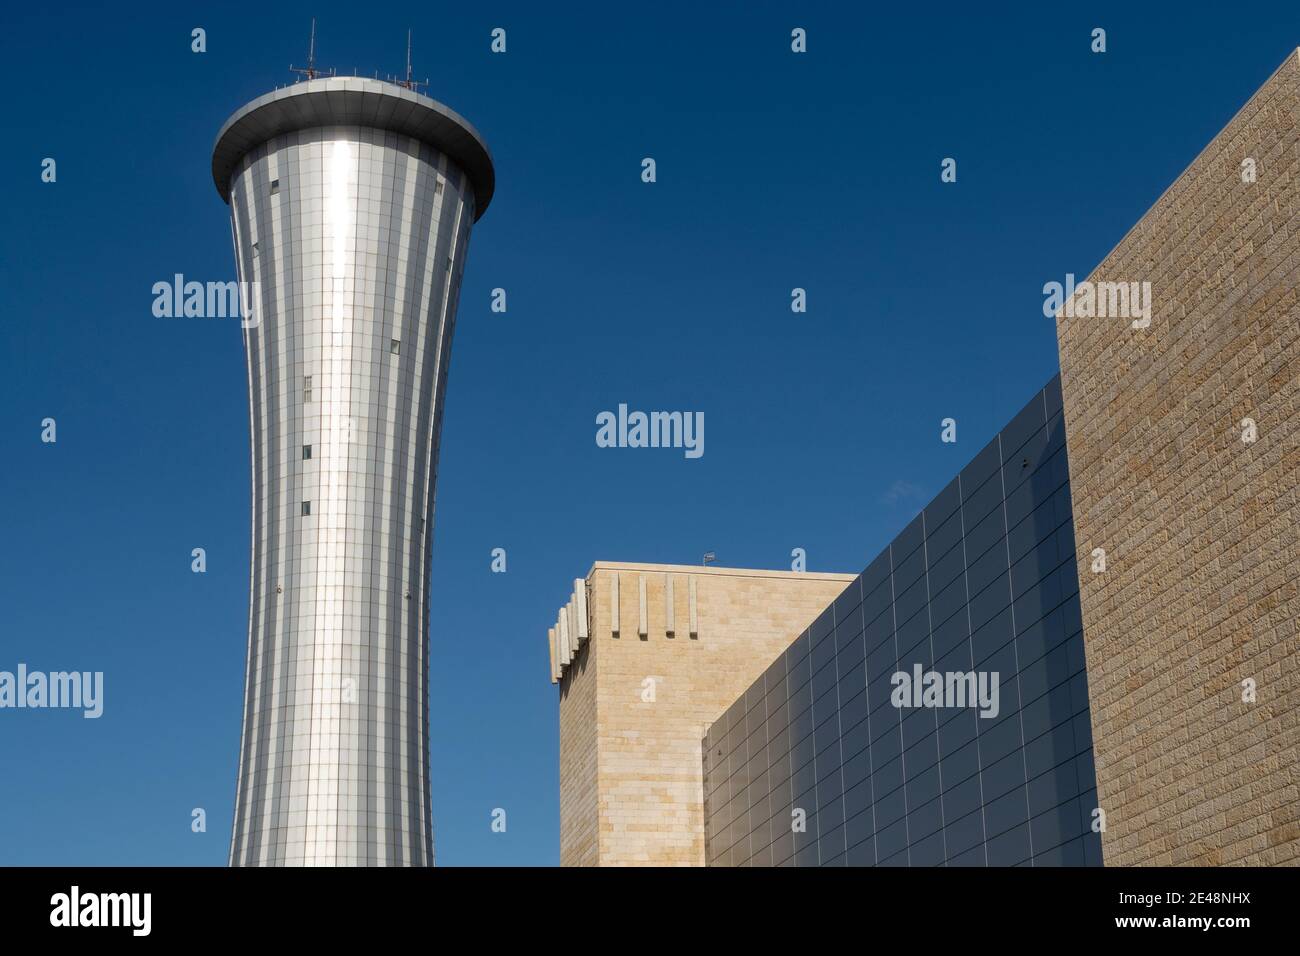 Air traffic control tower in Ben Gurion Airport widely known as Lod Airport in Israel Stock Photo